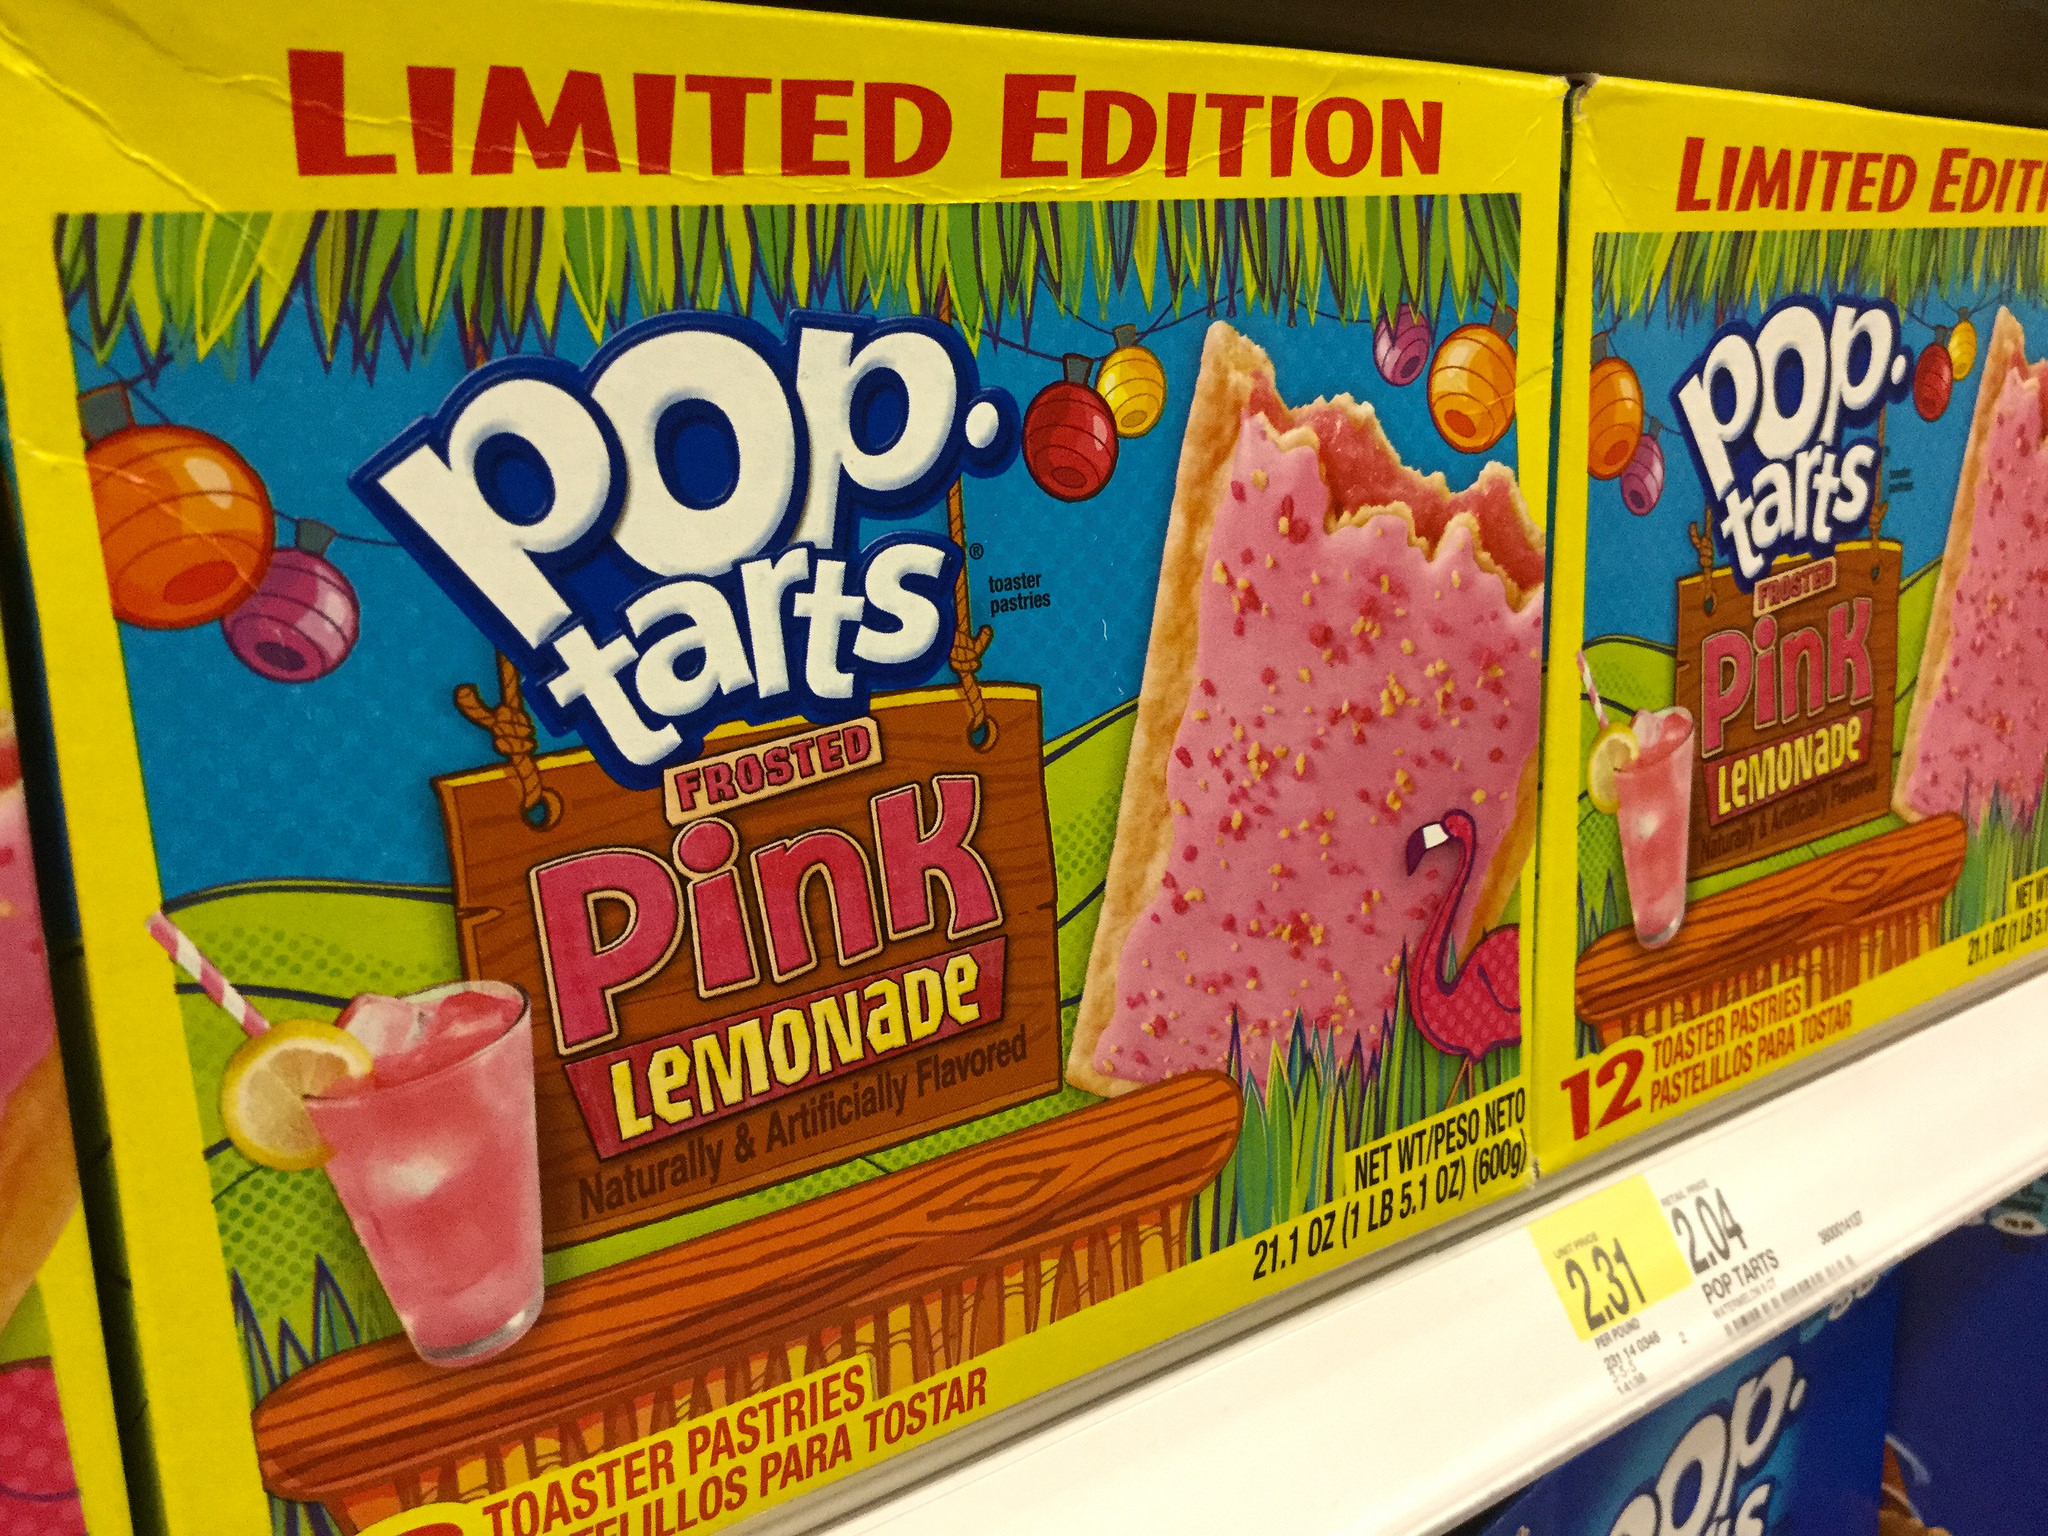 There’s A New Line Of Beverage-Flavored Pop-Tarts For Some Reason